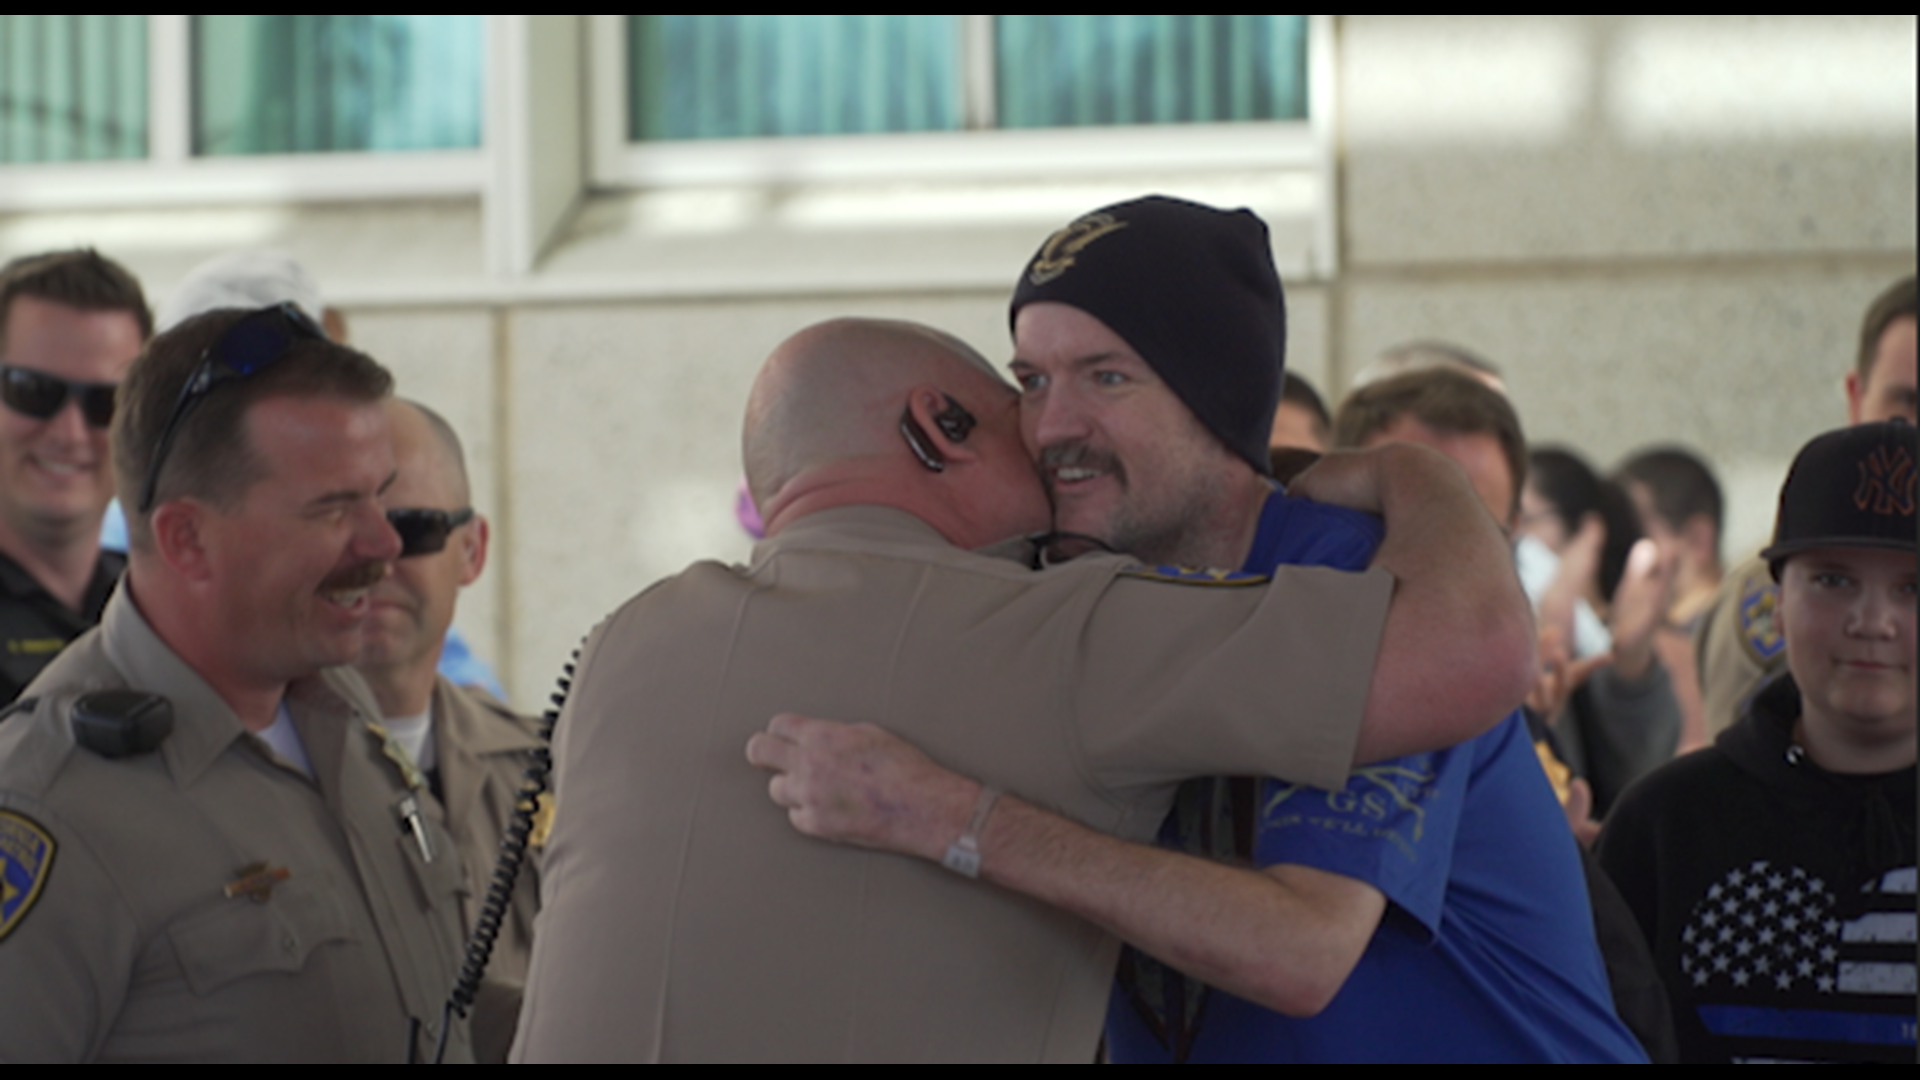 After spending four months in the hospital, Officer David Gordon was welcomed home by his community.